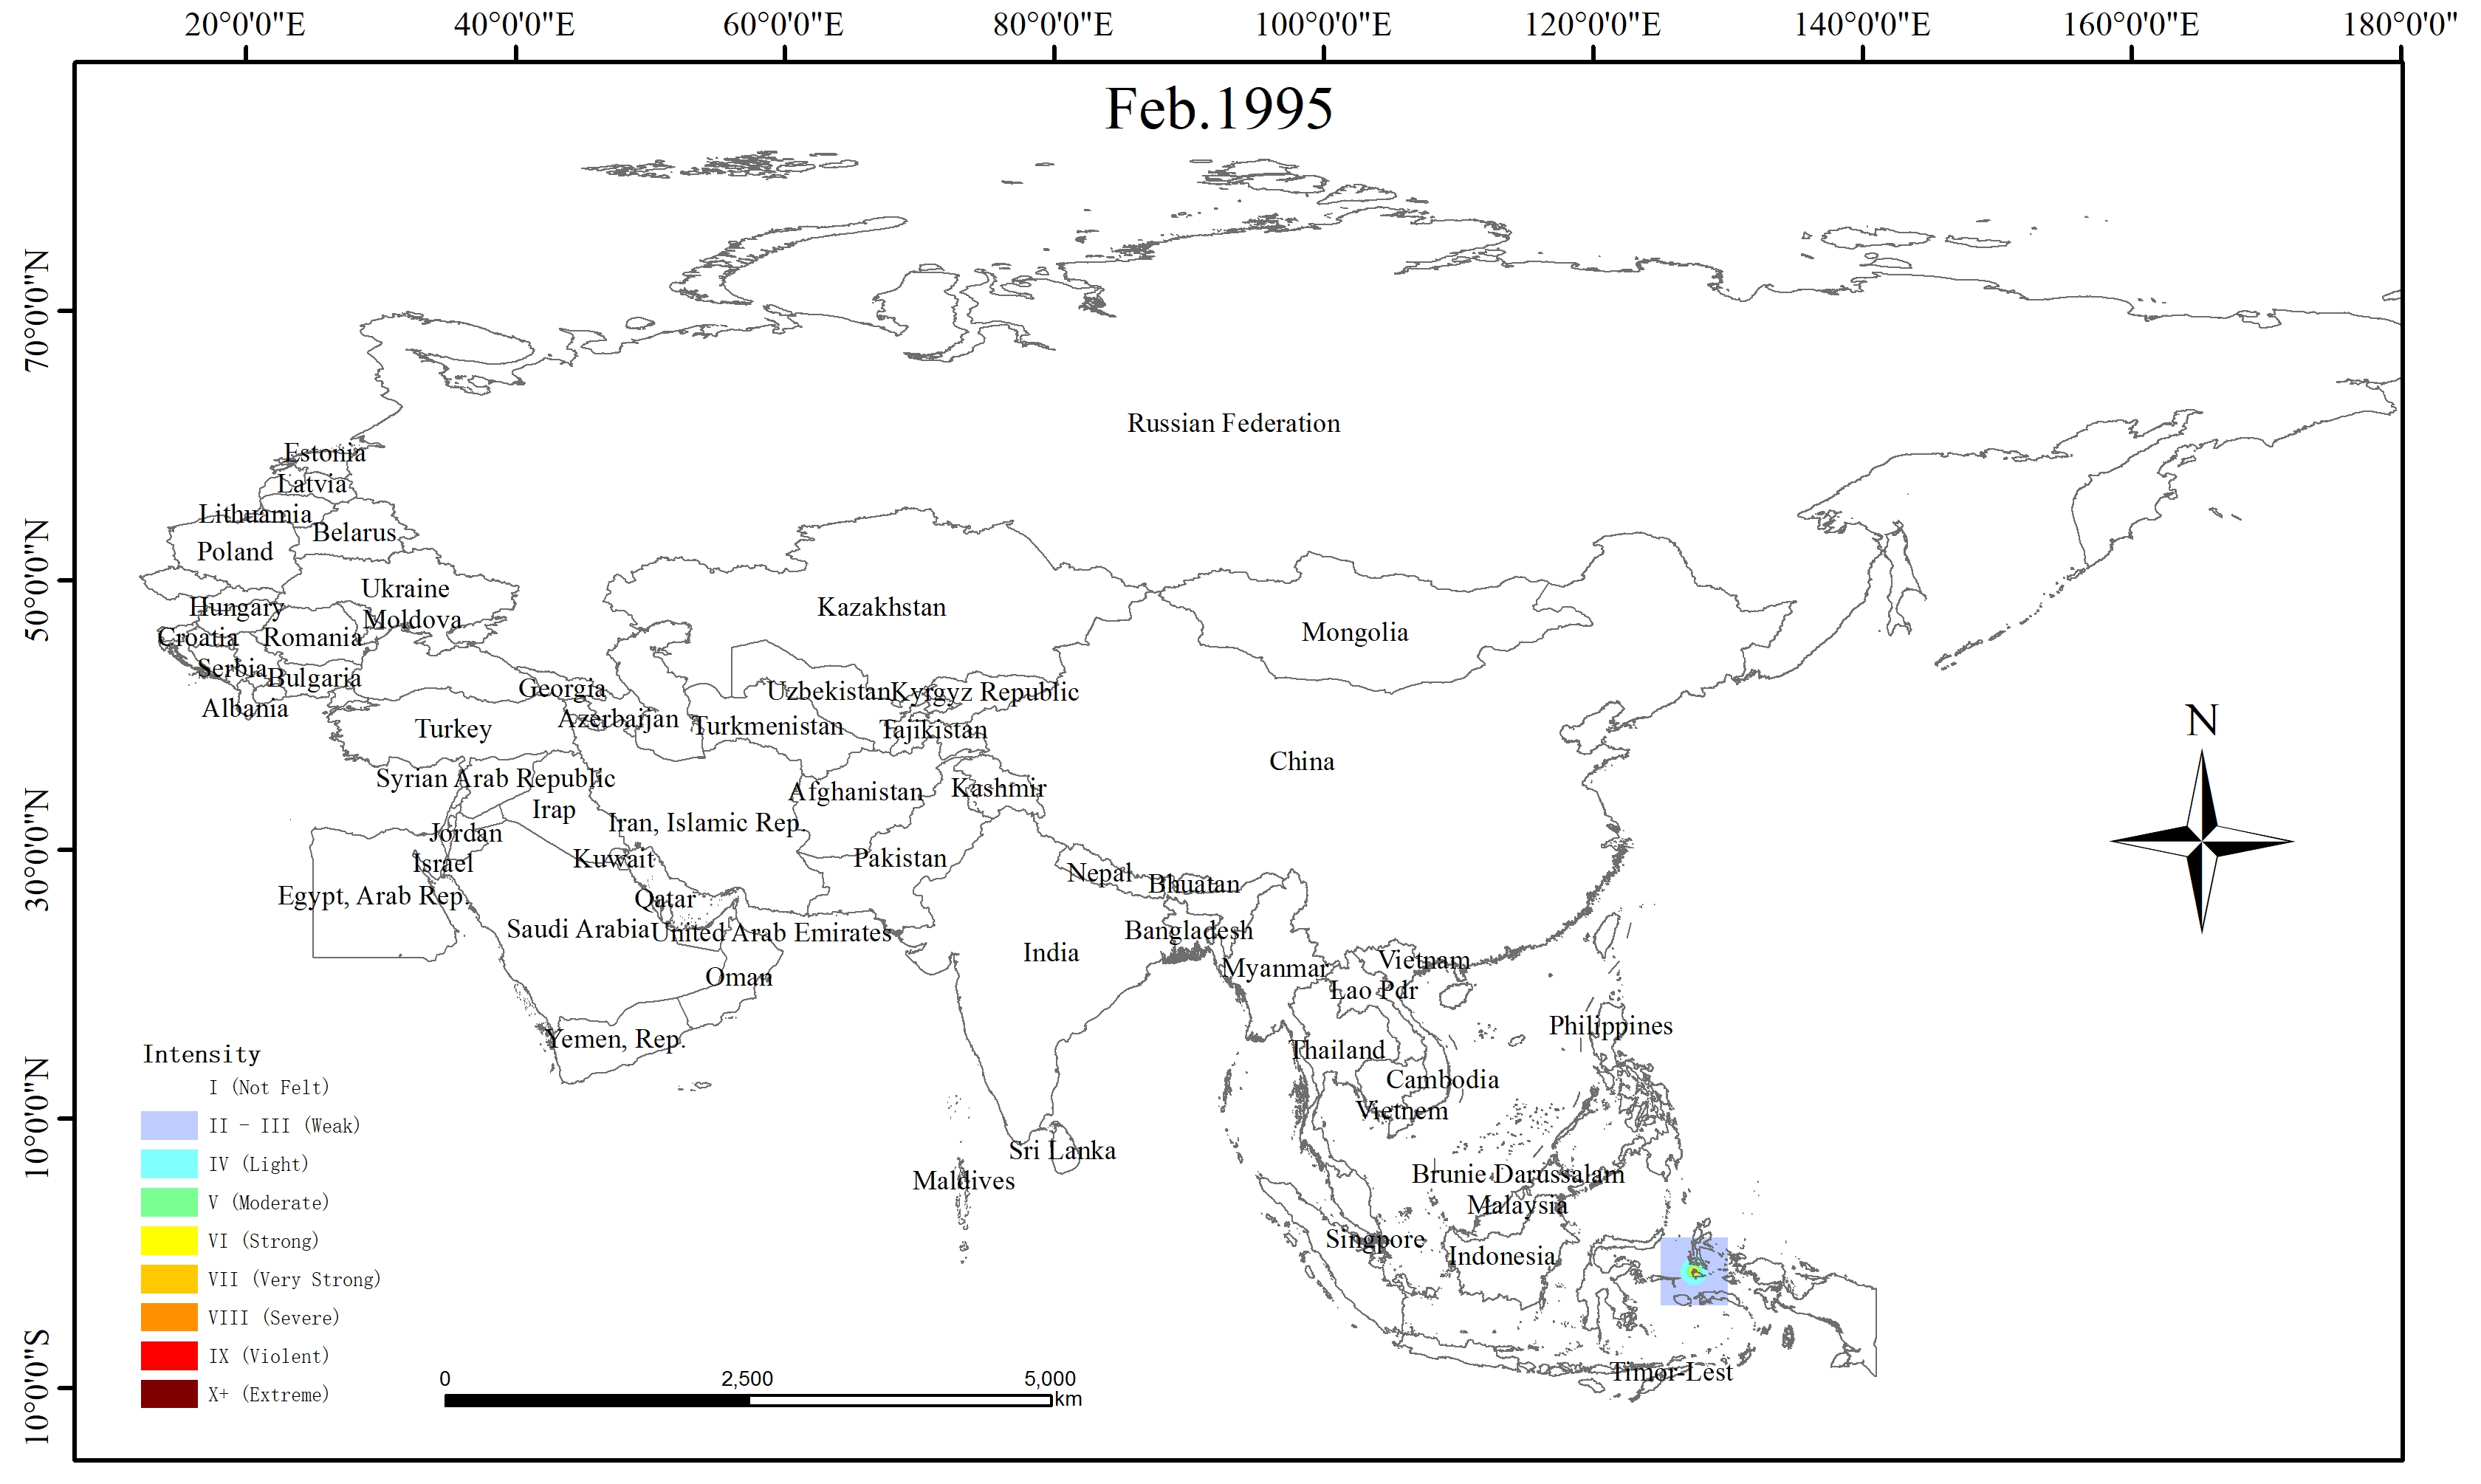 Spatio-temporal Distribution of Earthquake Disaster in the Belt and Road Area in 1995